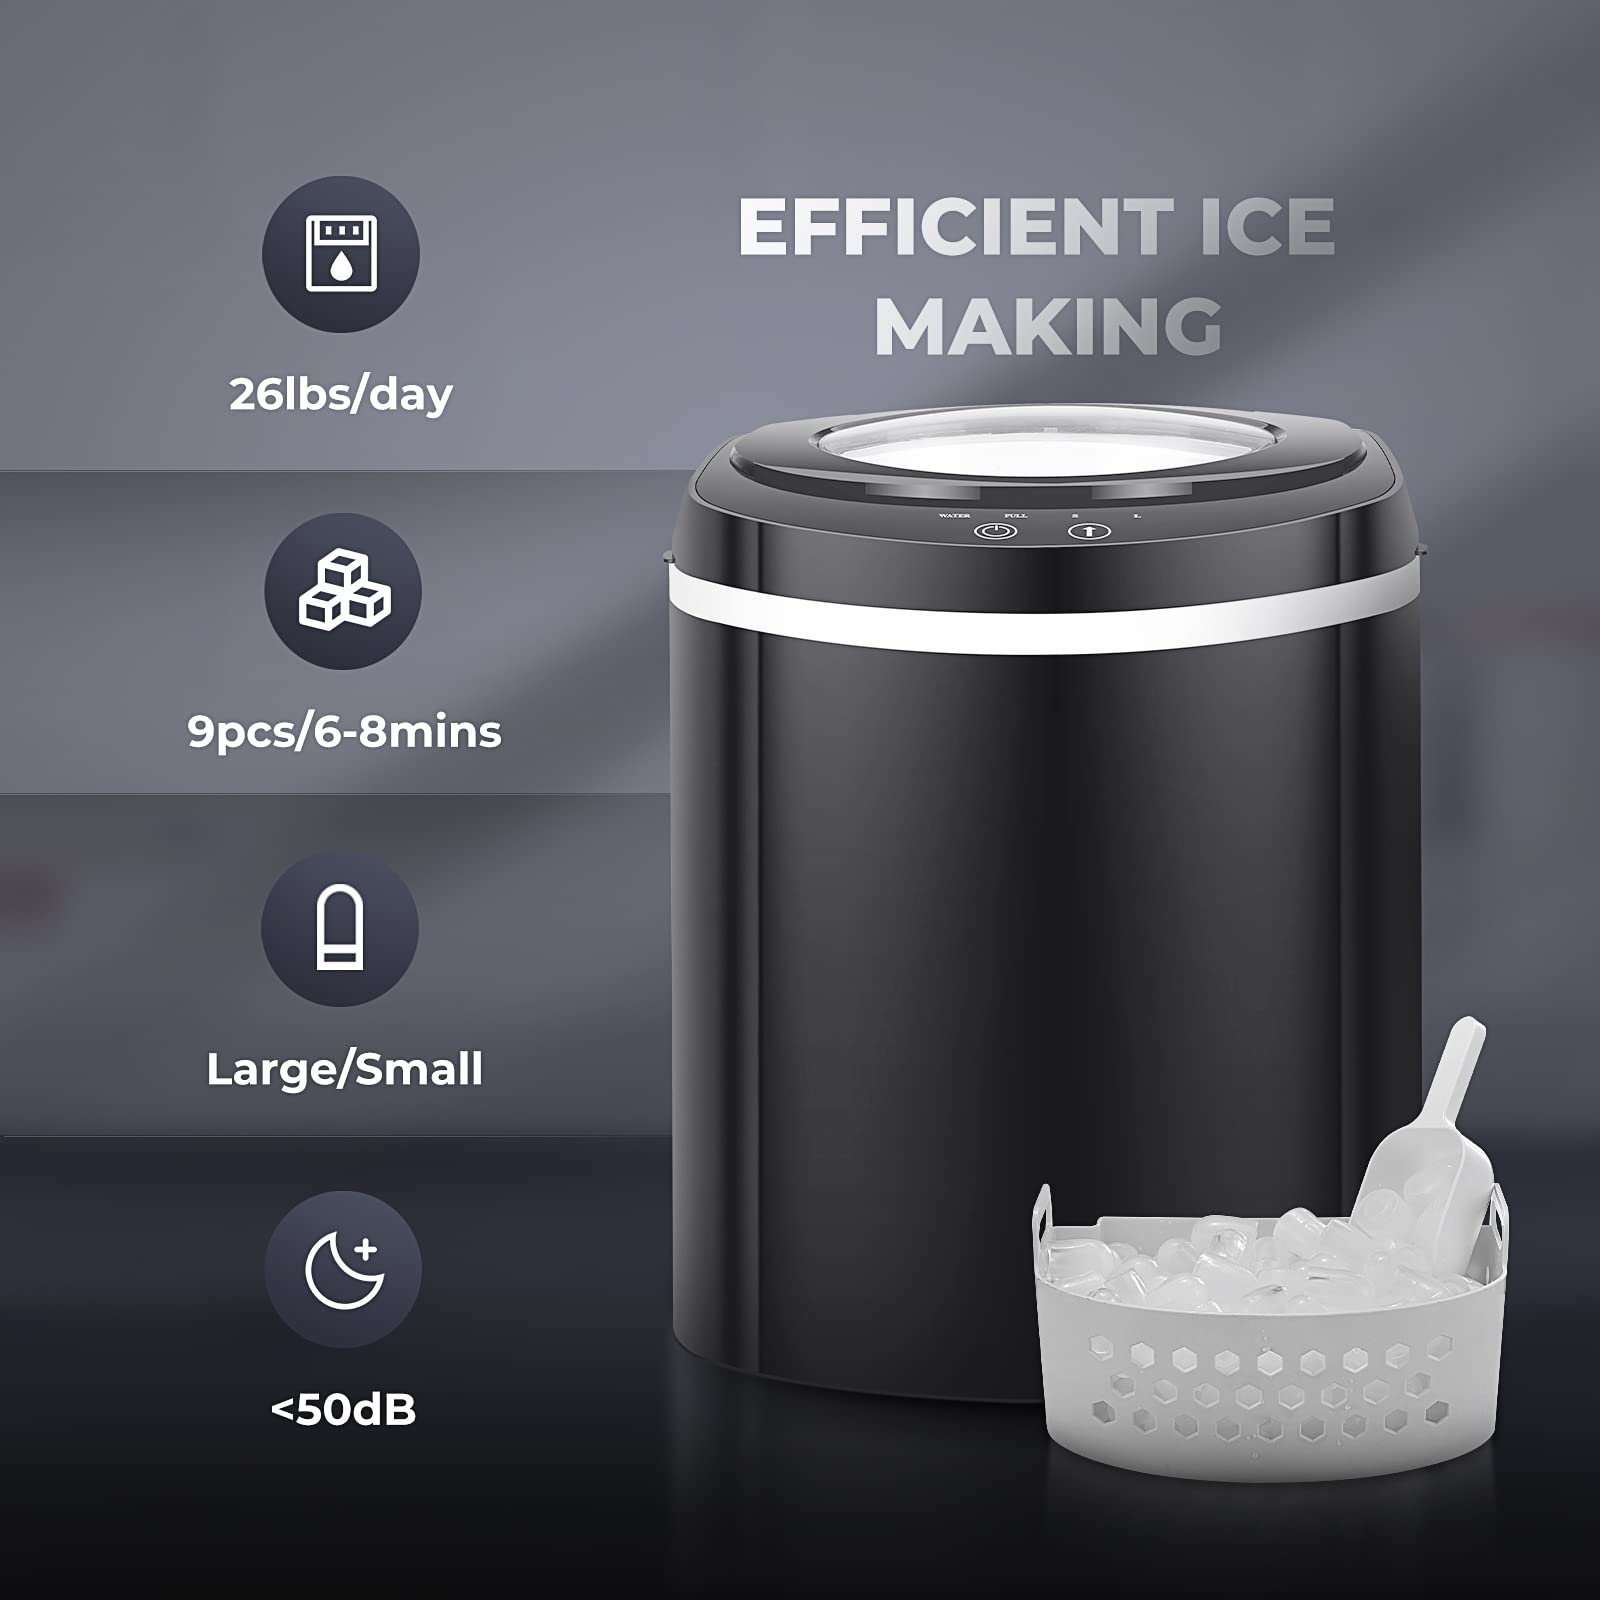 TRUSTECH Ice Maker Machine for Countertop, Automatic Ice Makers Countertop Self Cleaning, 9 Cubes Ready in 6 Mins, 26 lbs in 24 Hours, Perfect for Home/Kitchen/Office, Ice Scoop&Basket, Black